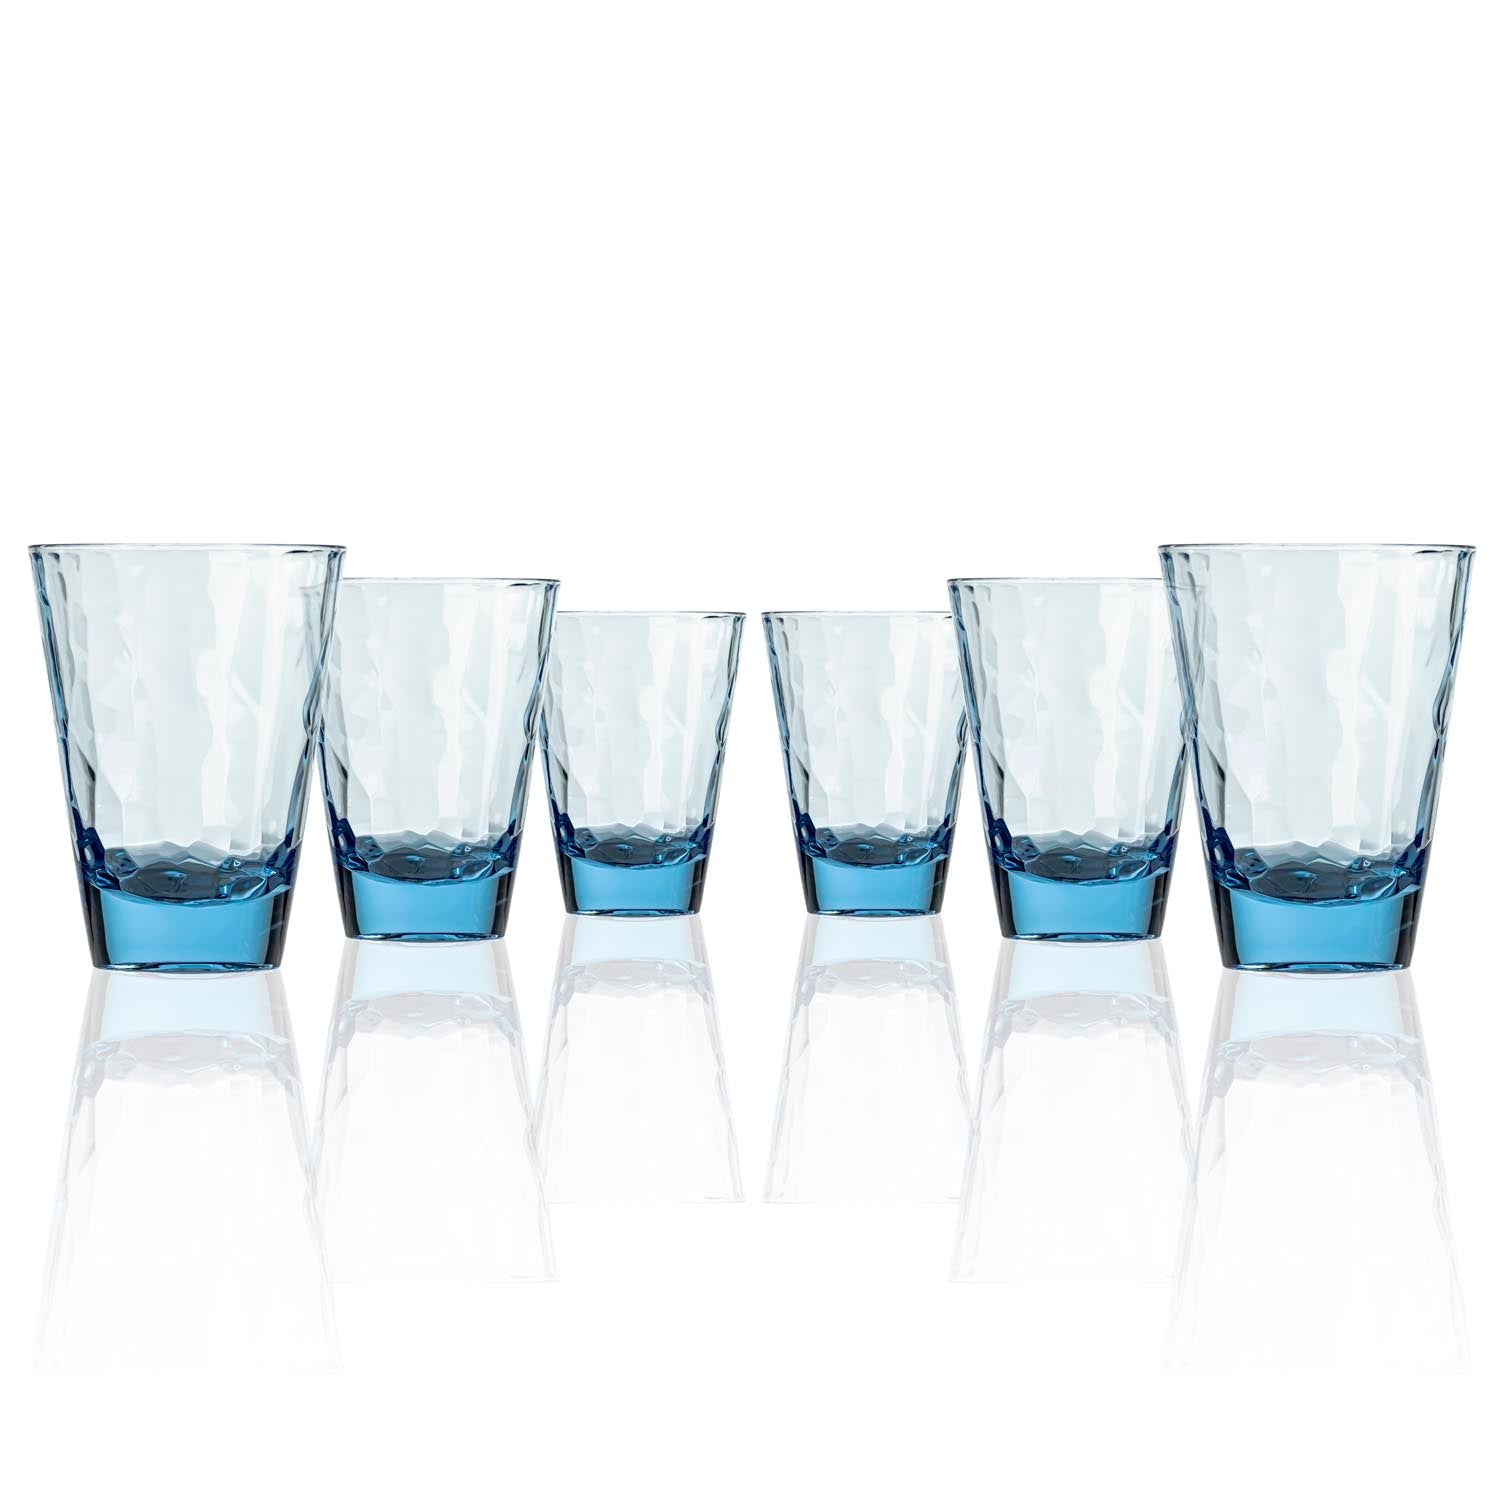 Set of 6, 14-ounce blue acrylic tumbler glasses from the Merritt Designs Cascade collection. Front view on white background